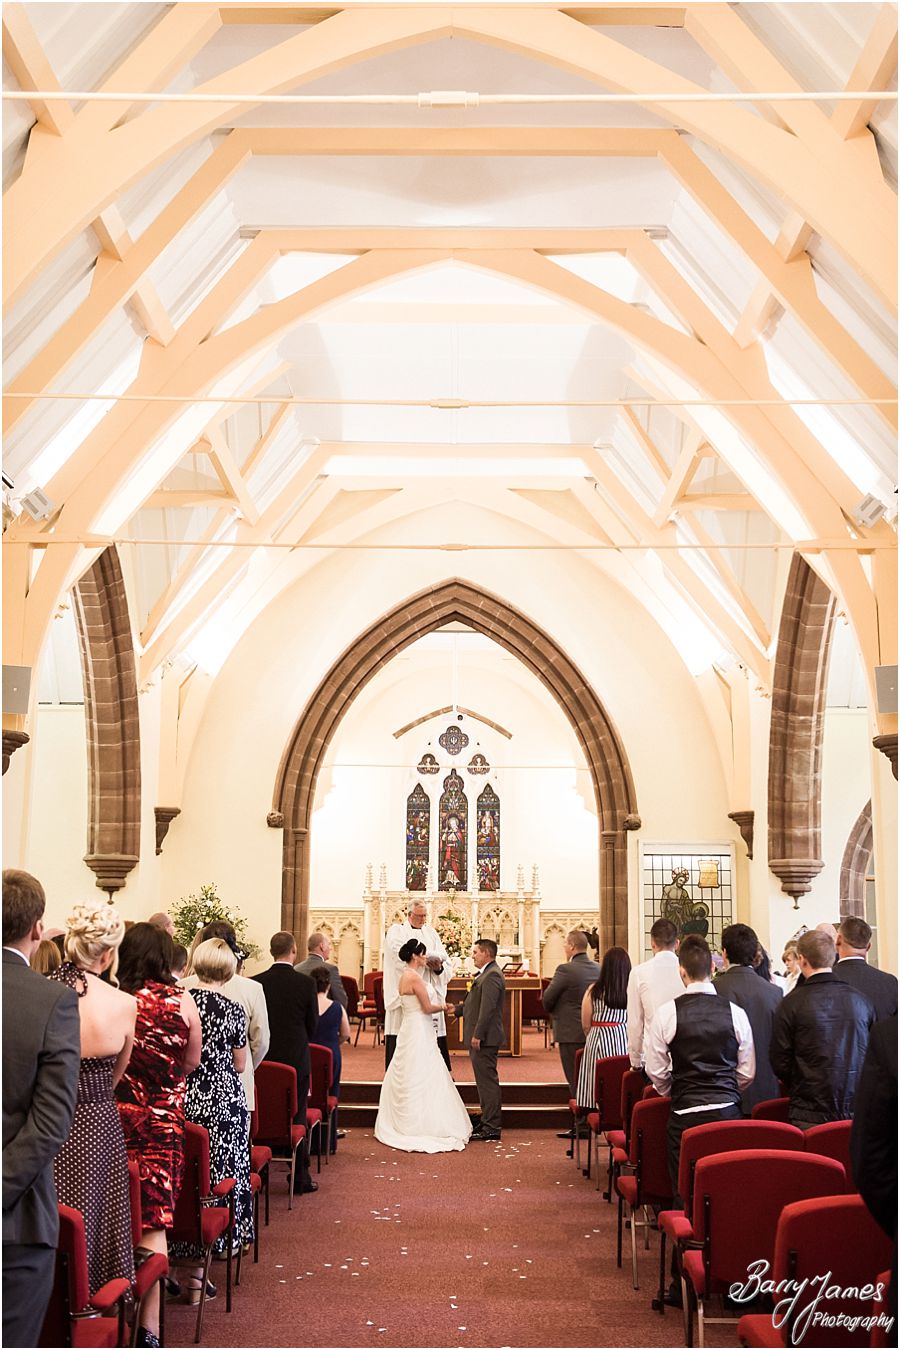 Beautiful creative wedding photography at St James Church in Brownhills by Experienced Contemporary Candid and Creative Wedding Photographer Barry James